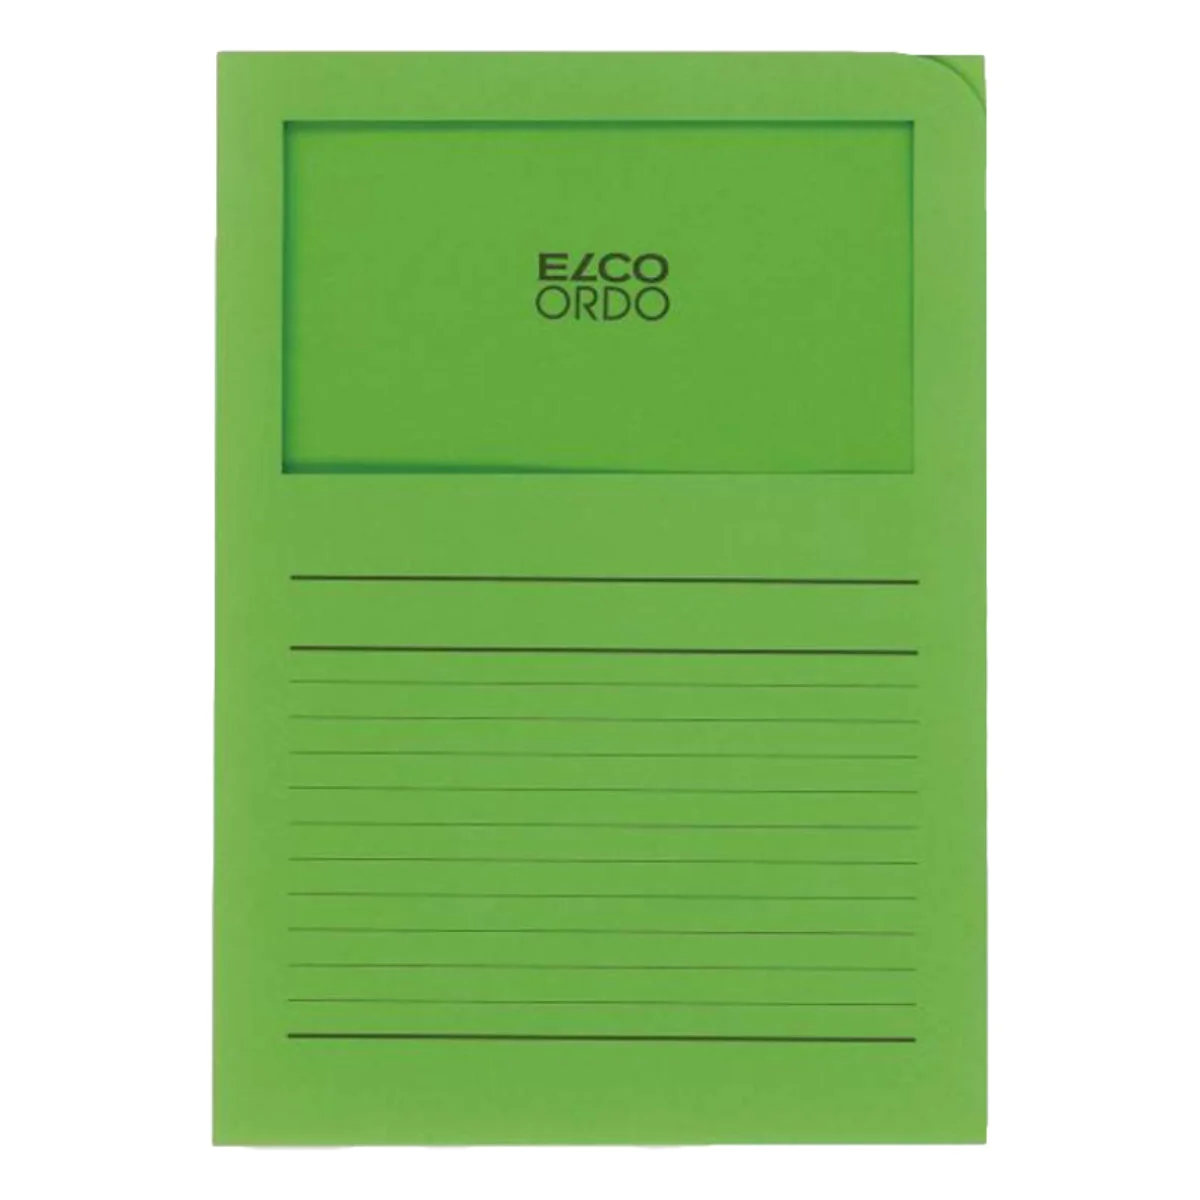 stationery box online stationery printer near me stationery shops in deira dubai wholesale office stationery suppliers in dubai